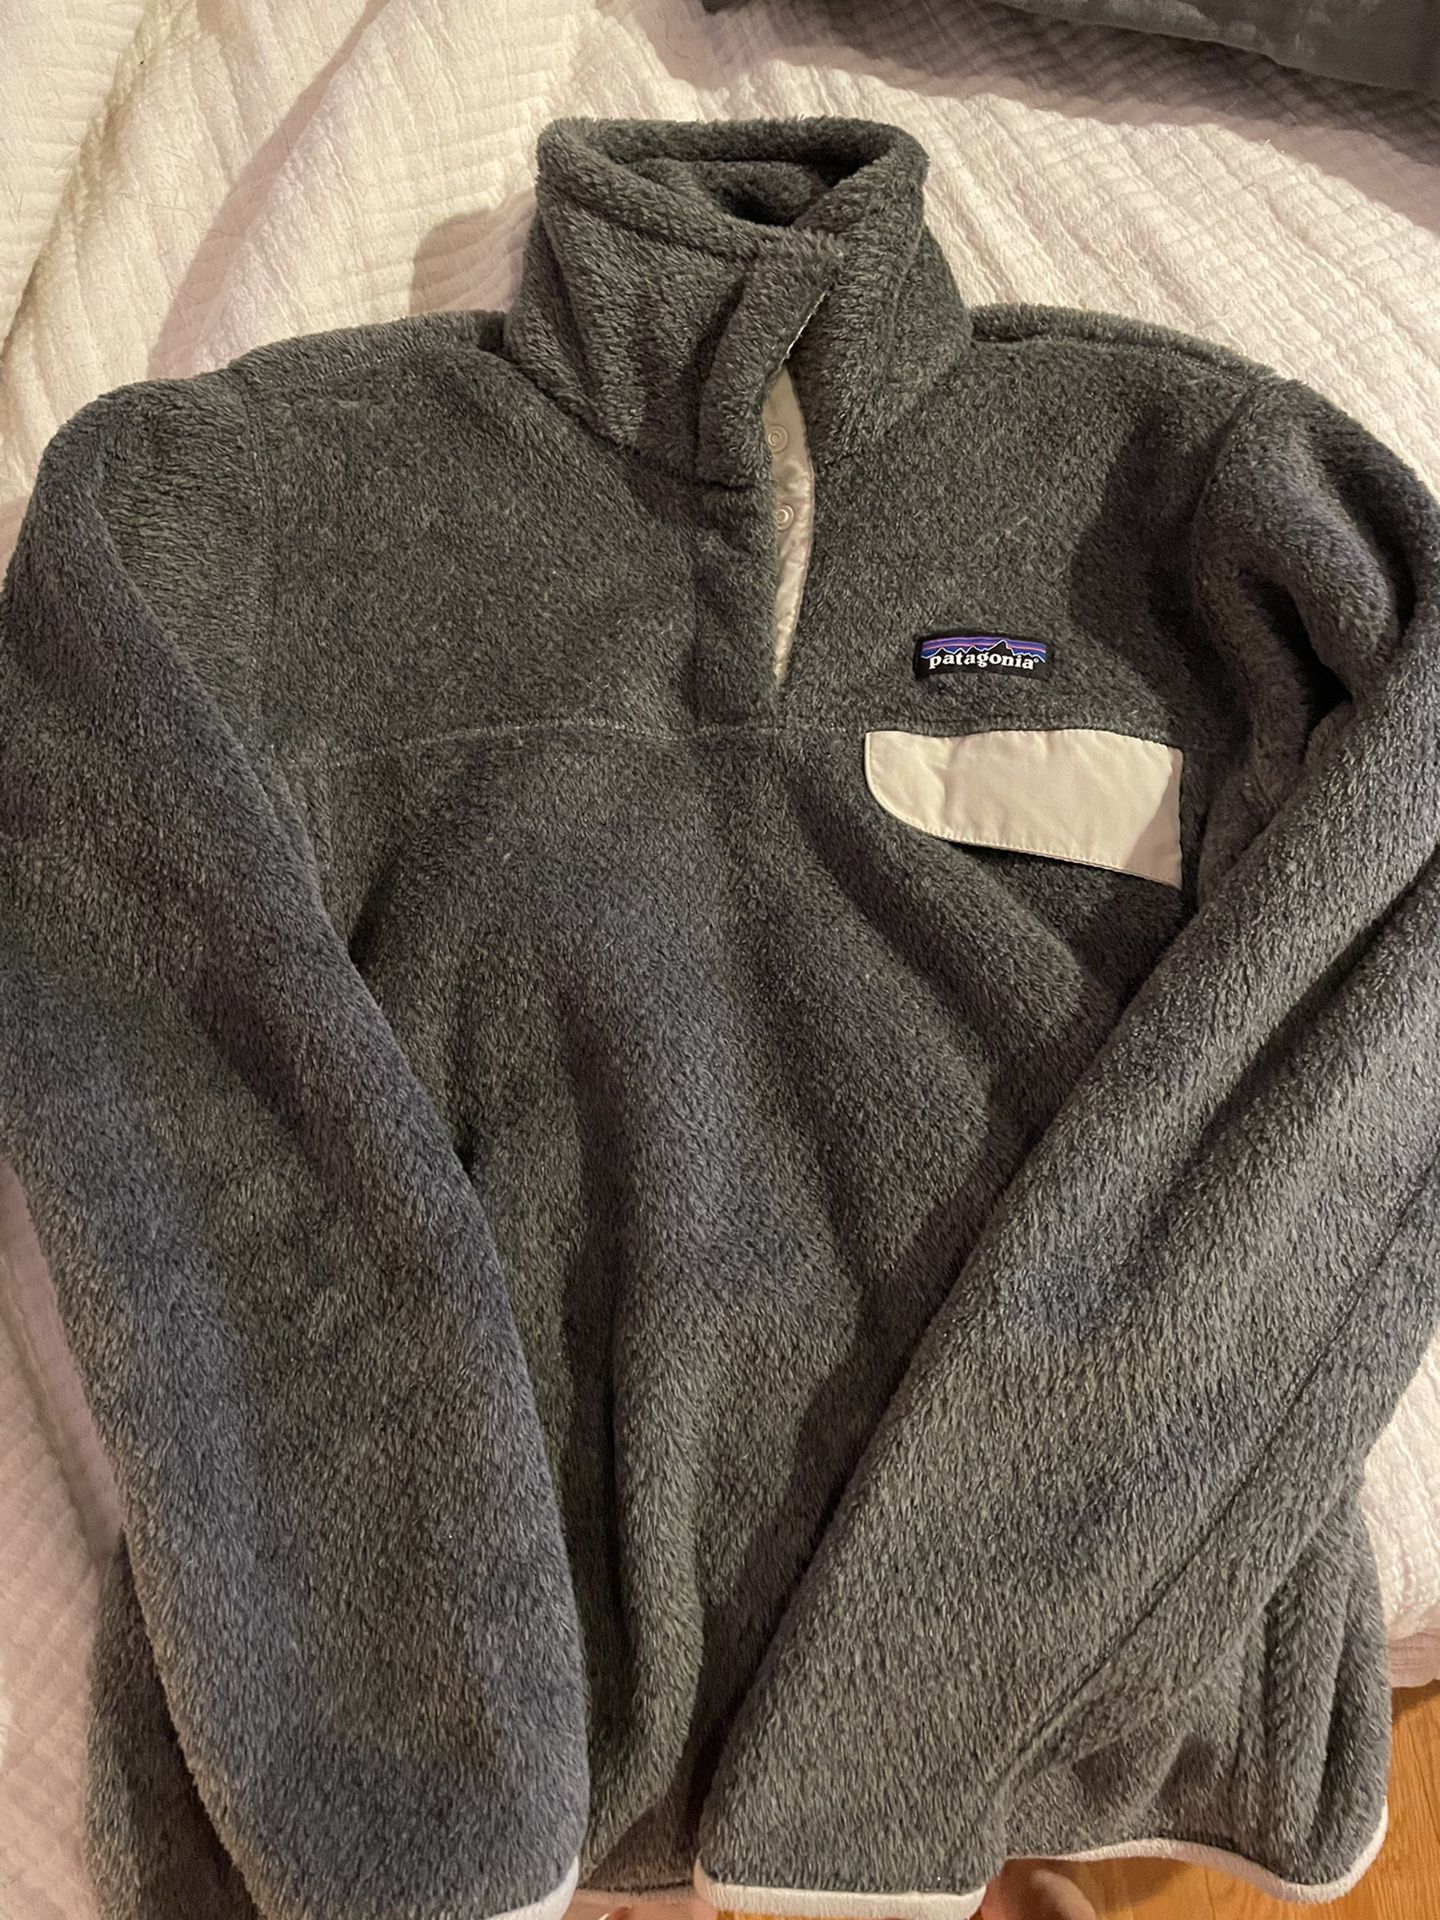 Patagonia Snap T Fleece Pullover - Womens Small (gray/cream) for